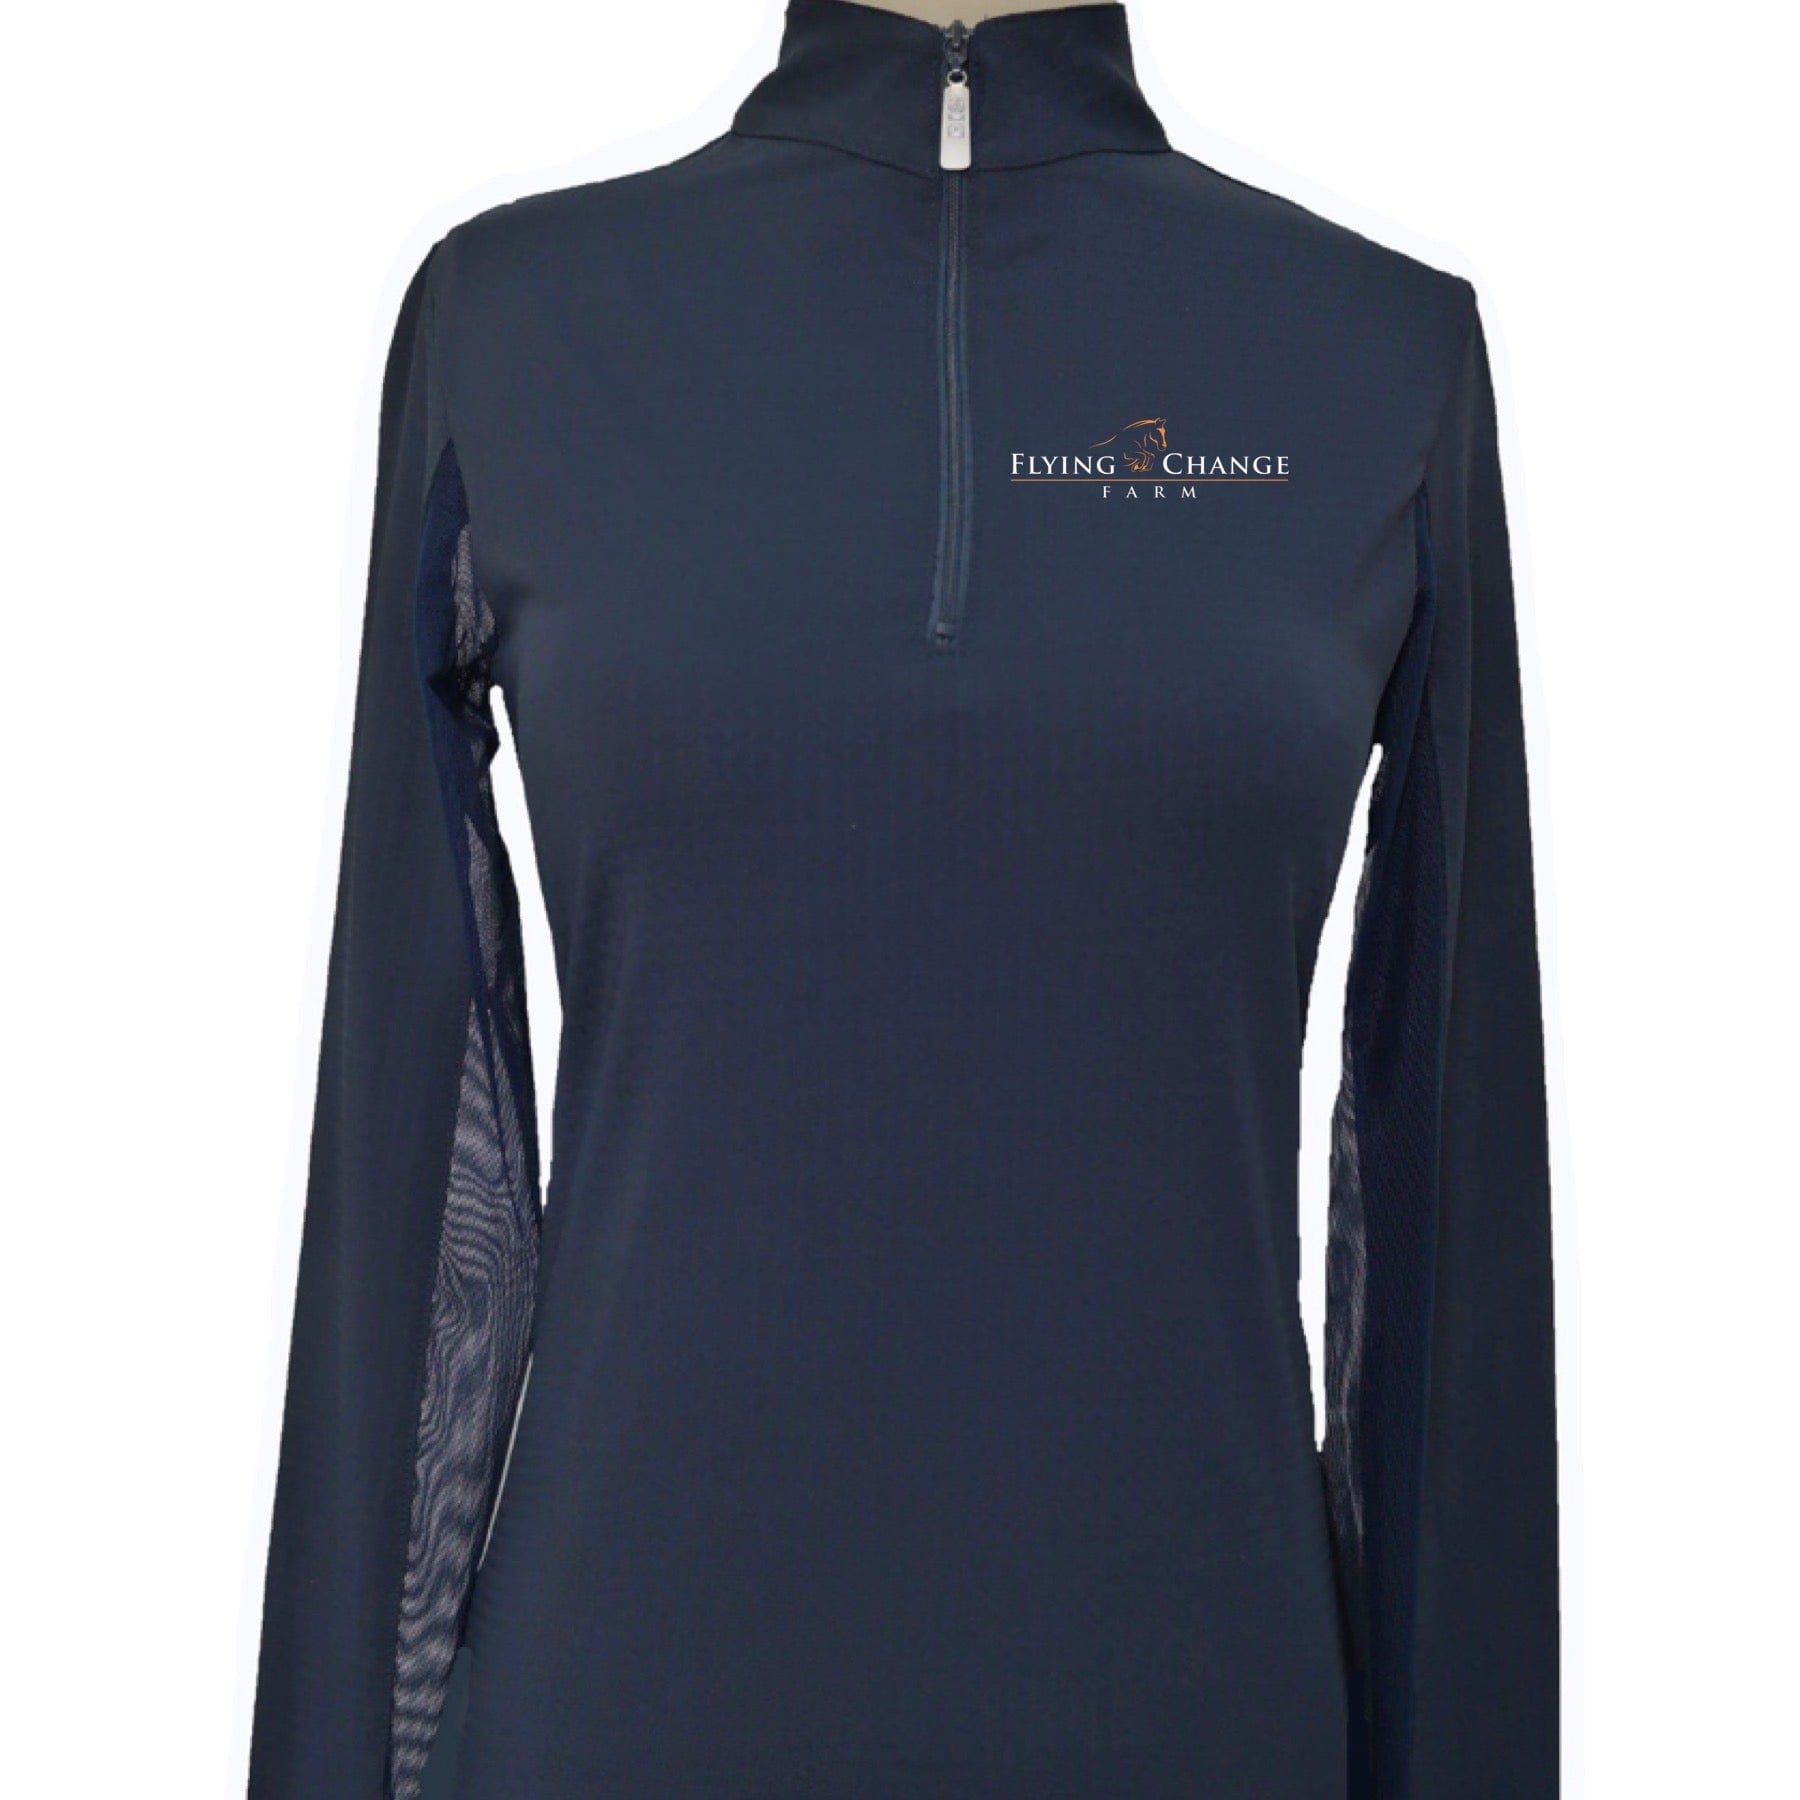 Equestrian Team Apparel Flying Change Farm Sun Shirt equestrian team apparel online tack store mobile tack store custom farm apparel custom show stable clothing equestrian lifestyle horse show clothing riding clothes horses equestrian tack store